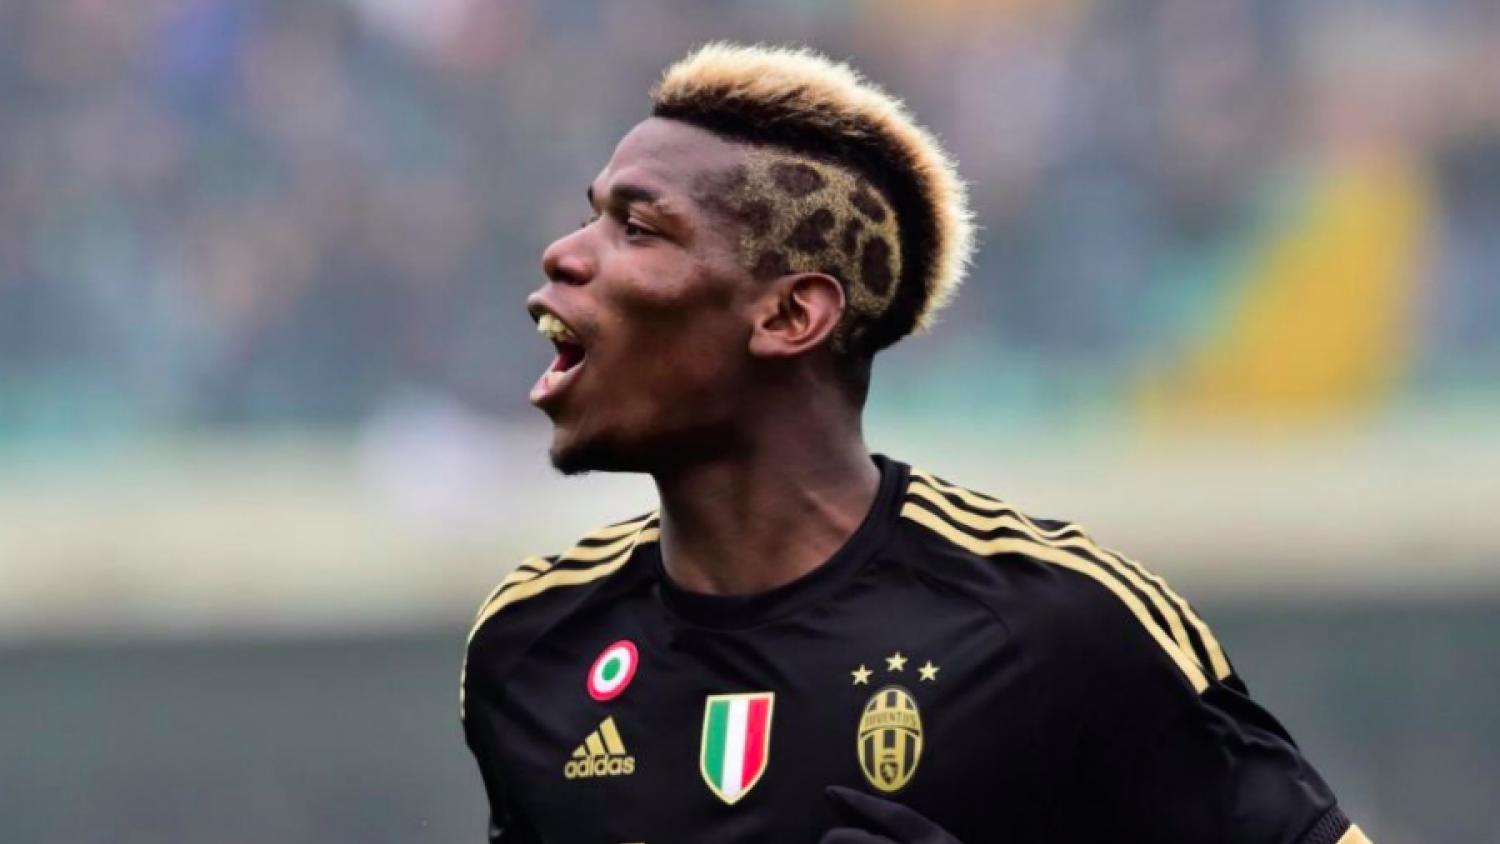 The Craziest Soccer Hairstyles Of All Time | The18